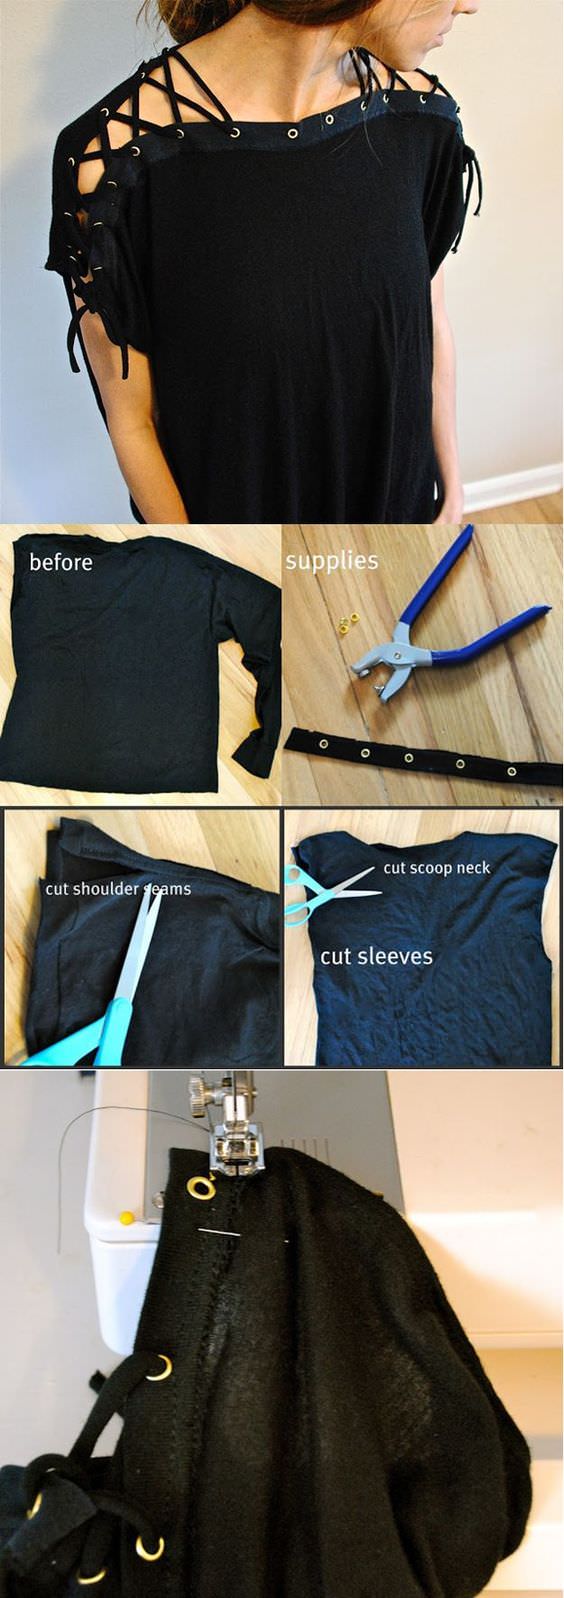 These DIY clothes will make a great addition to your closet. They’re versatile, practical, and can be dressed up or down, depending on the occasion.